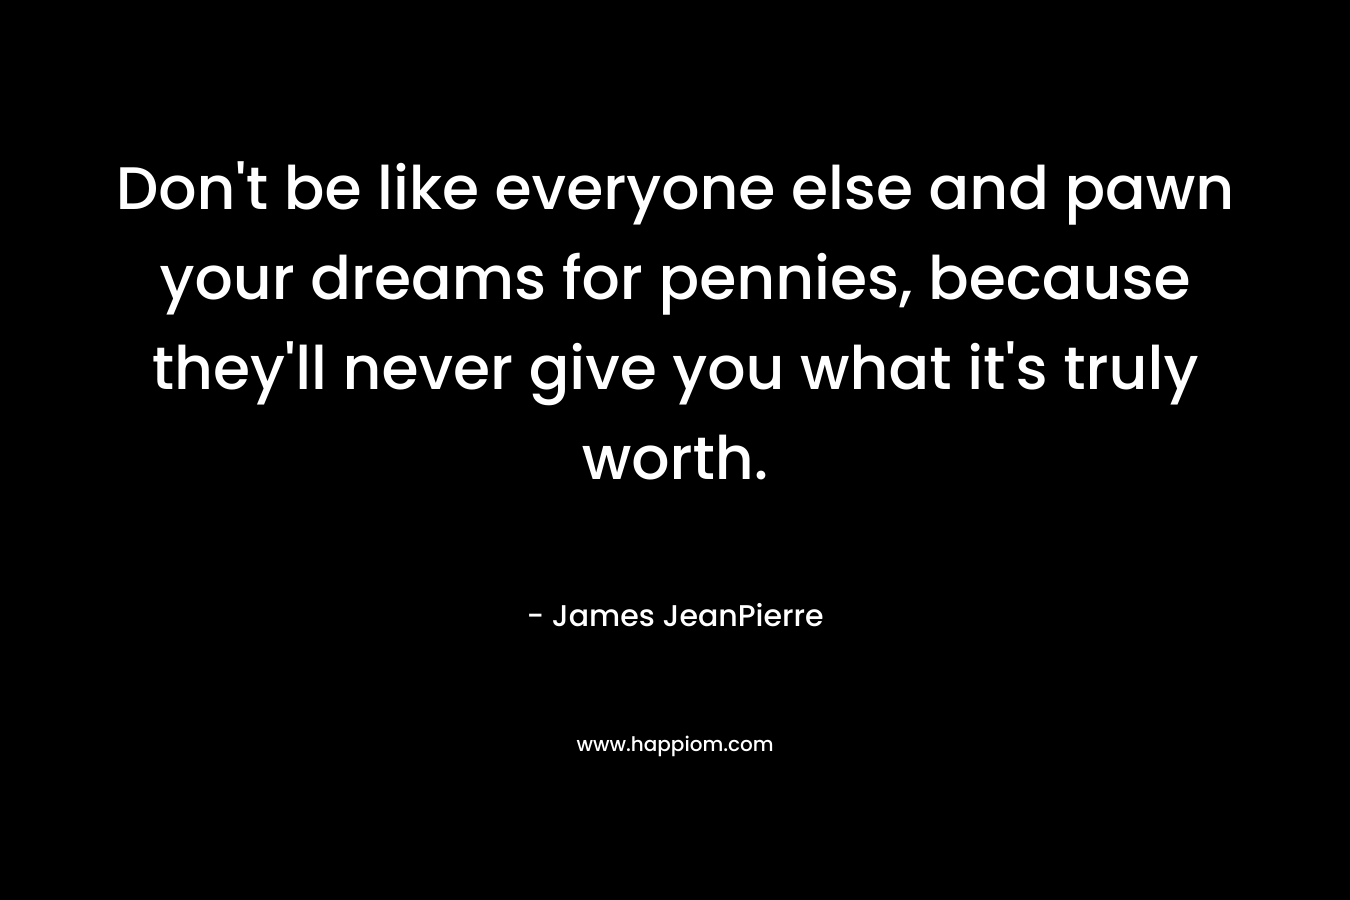 Don't be like everyone else and pawn your dreams for pennies, because they'll never give you what it's truly worth.